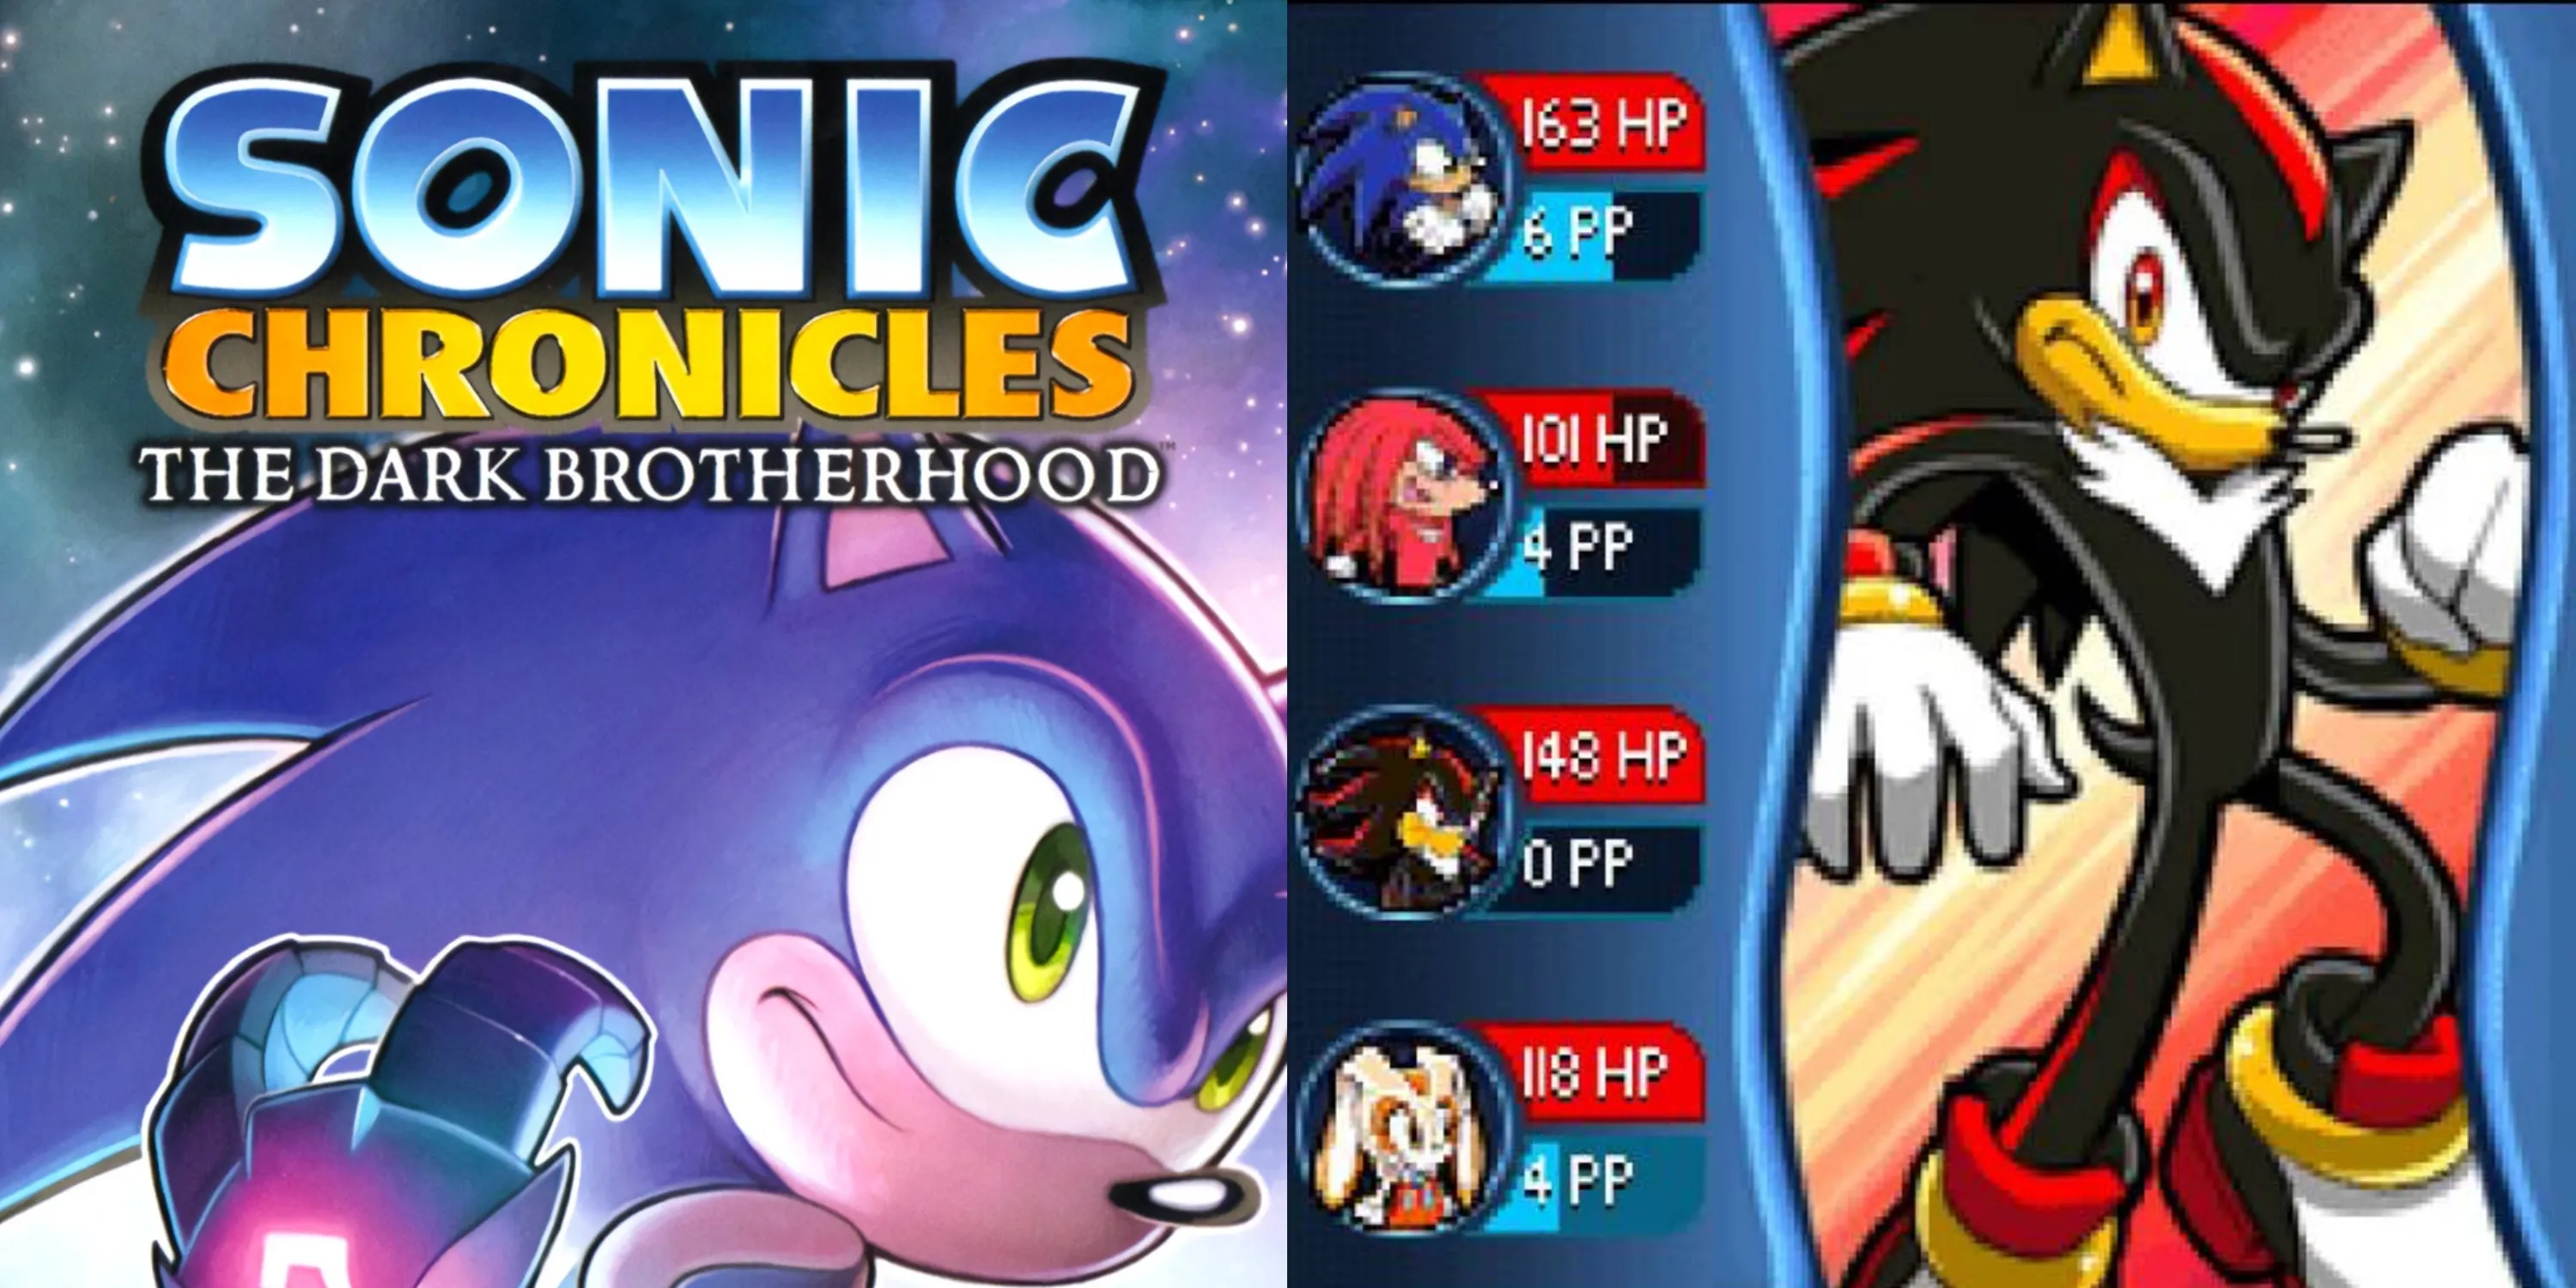 Screenshot of Sonic Chronicles key art and the DS screen display when Shadow is the player character